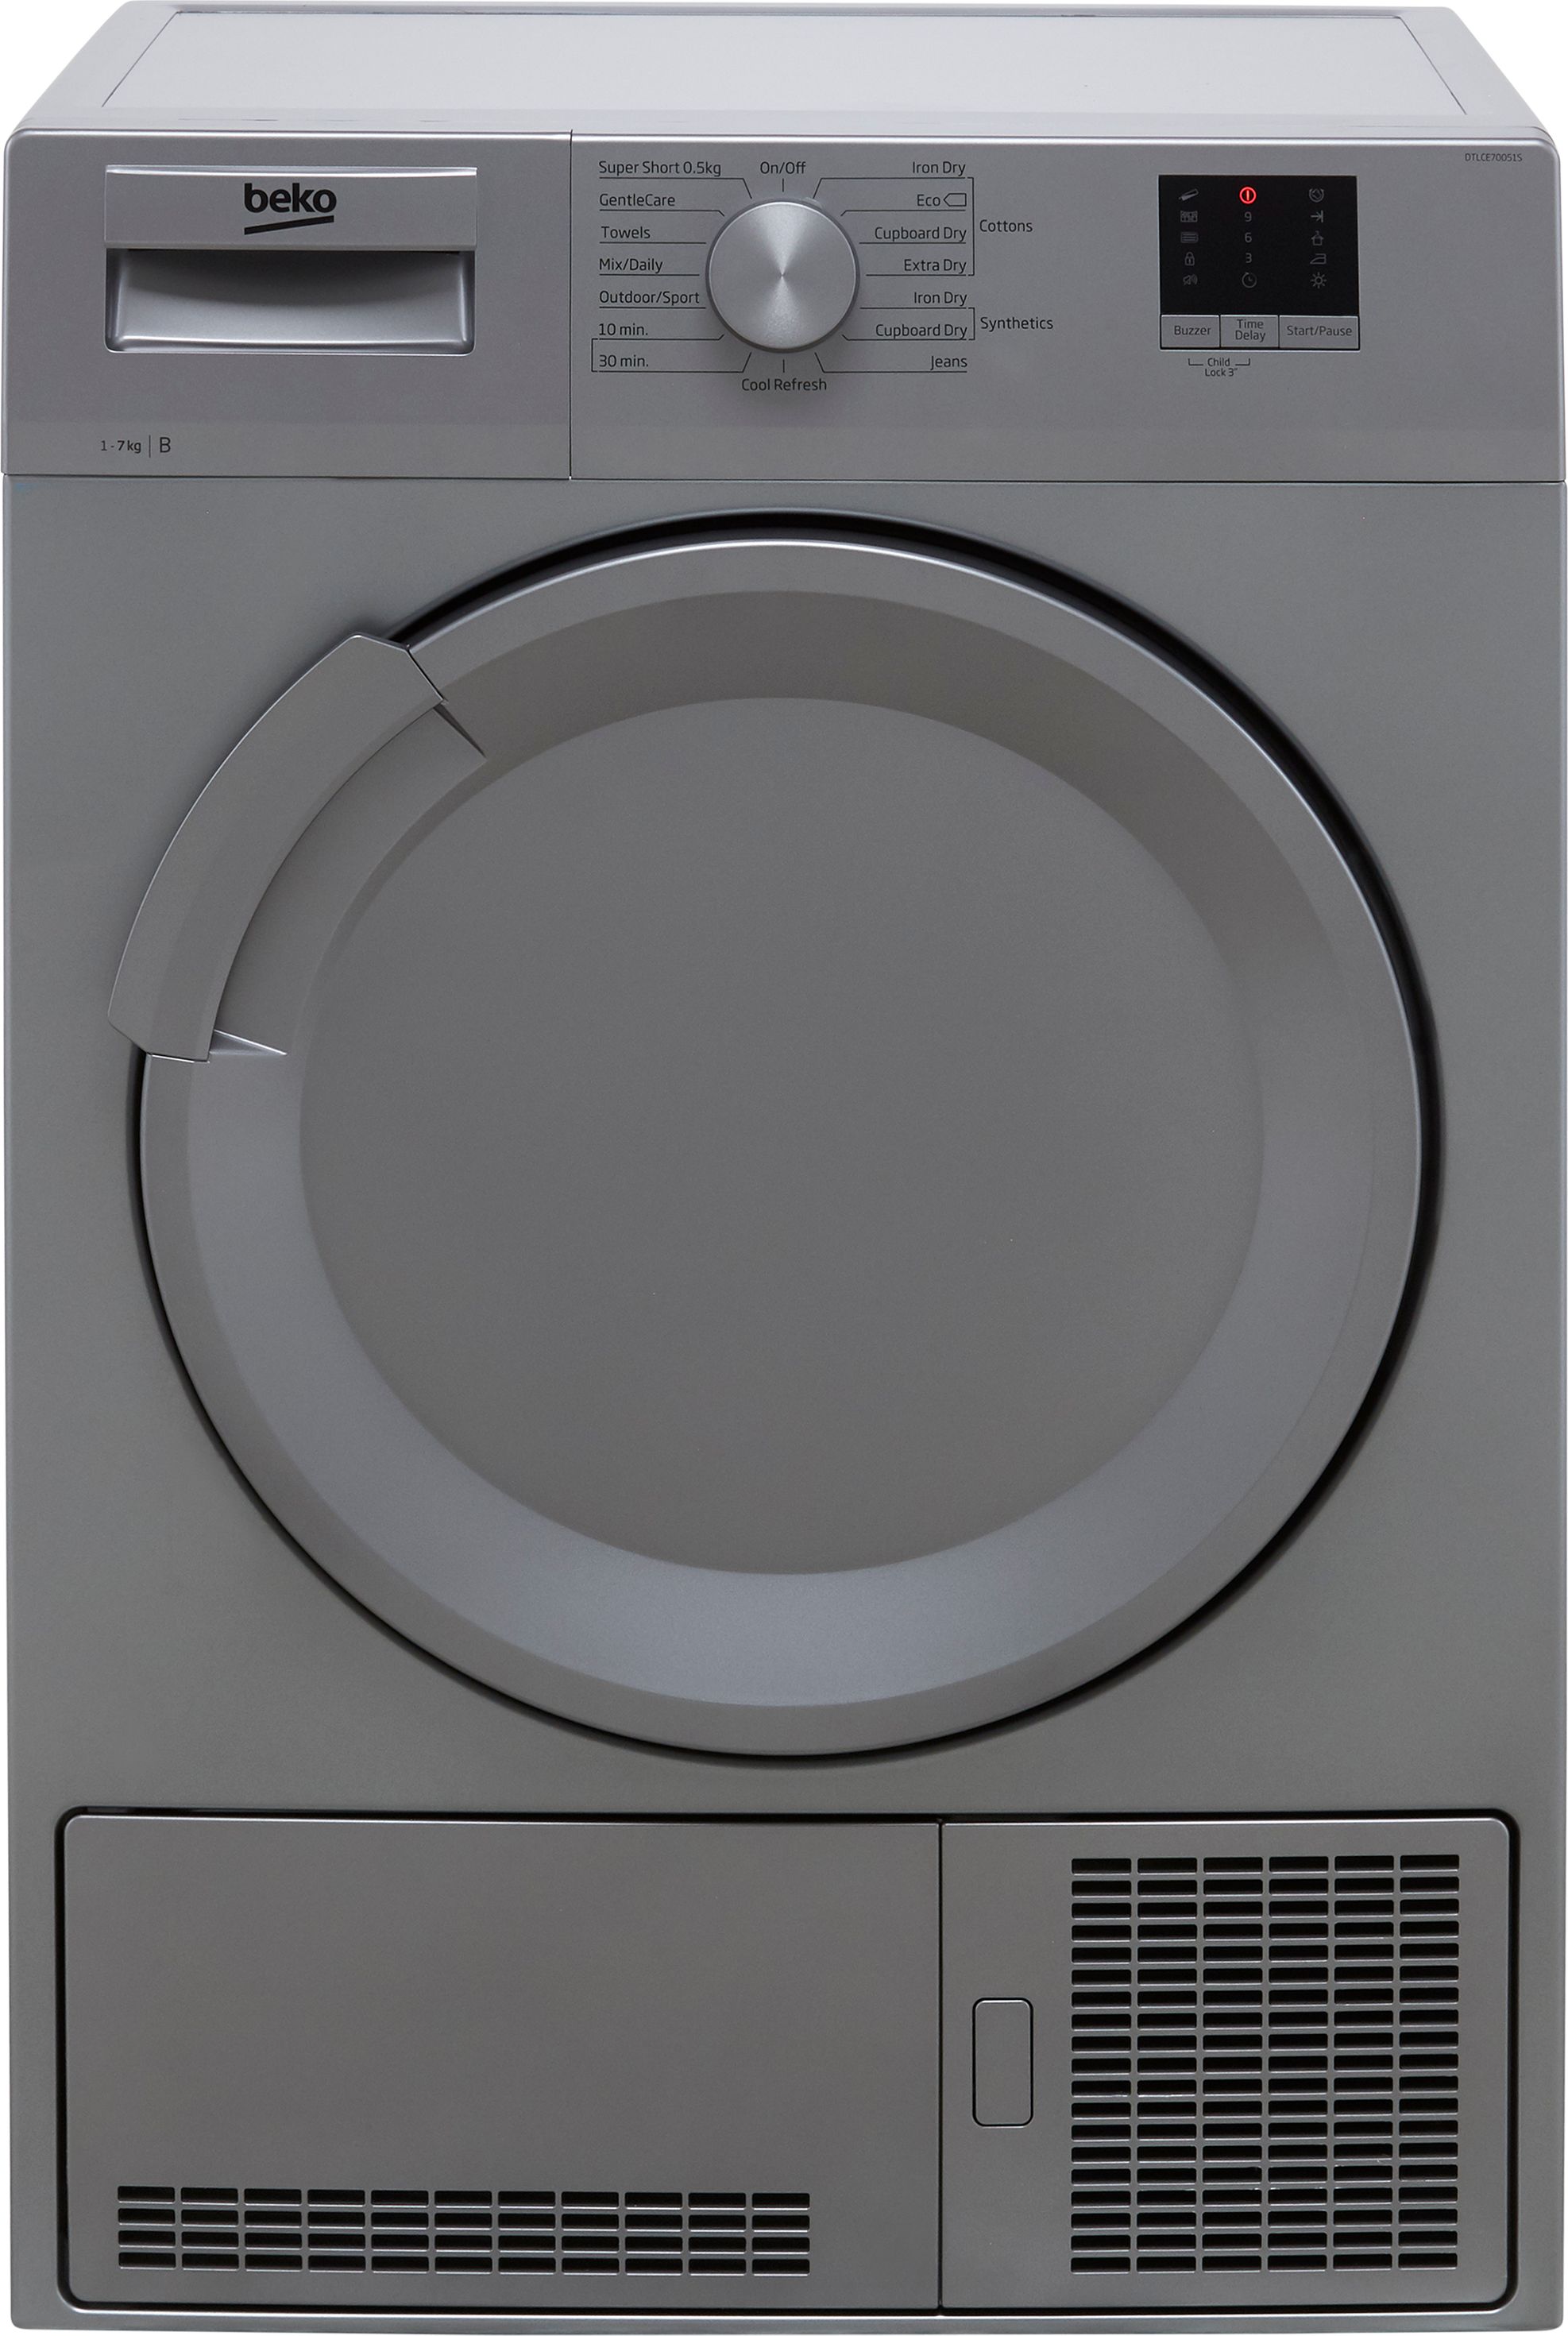 Beko DTLCE70051S 7Kg Condenser Tumble Dryer - Silver - B Rated, Silver